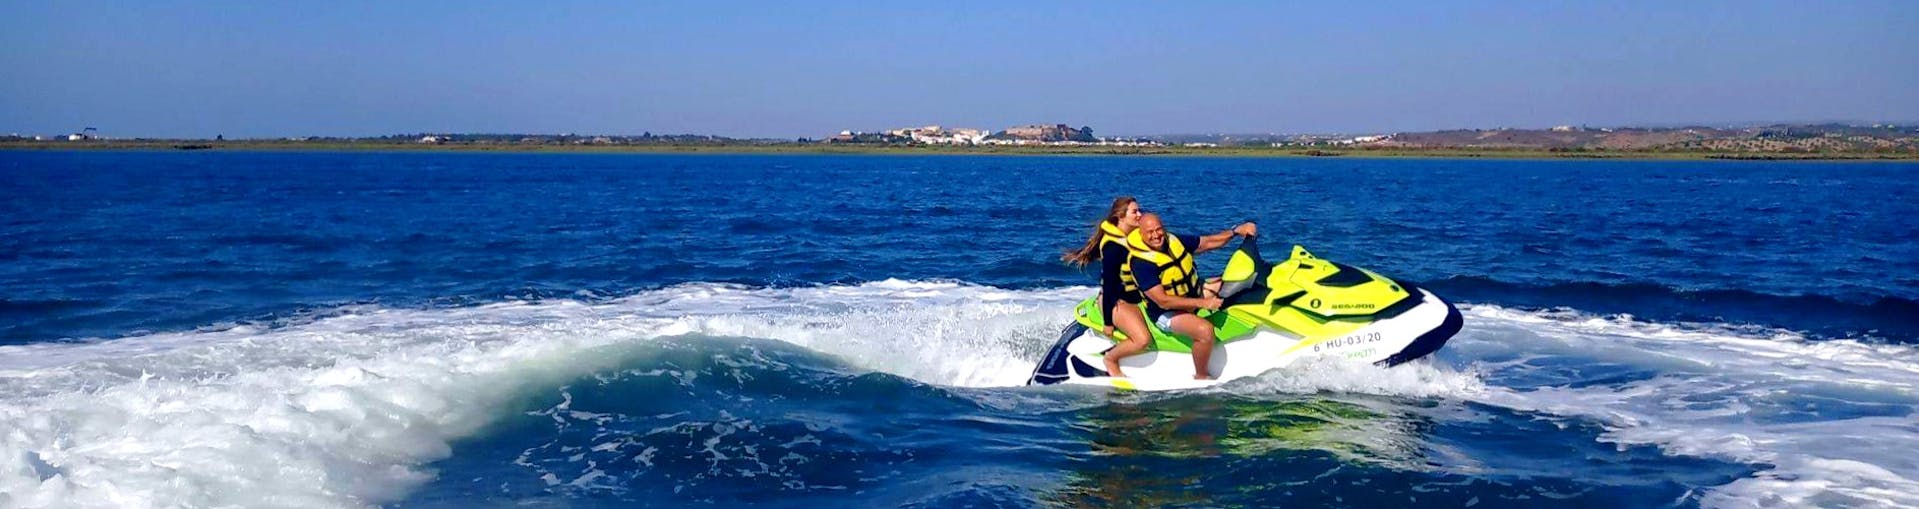 Two participants splashing around in the waters of the Guadiana River, having fun during a jet ski safari with Jet Ski Dreams Huelva.